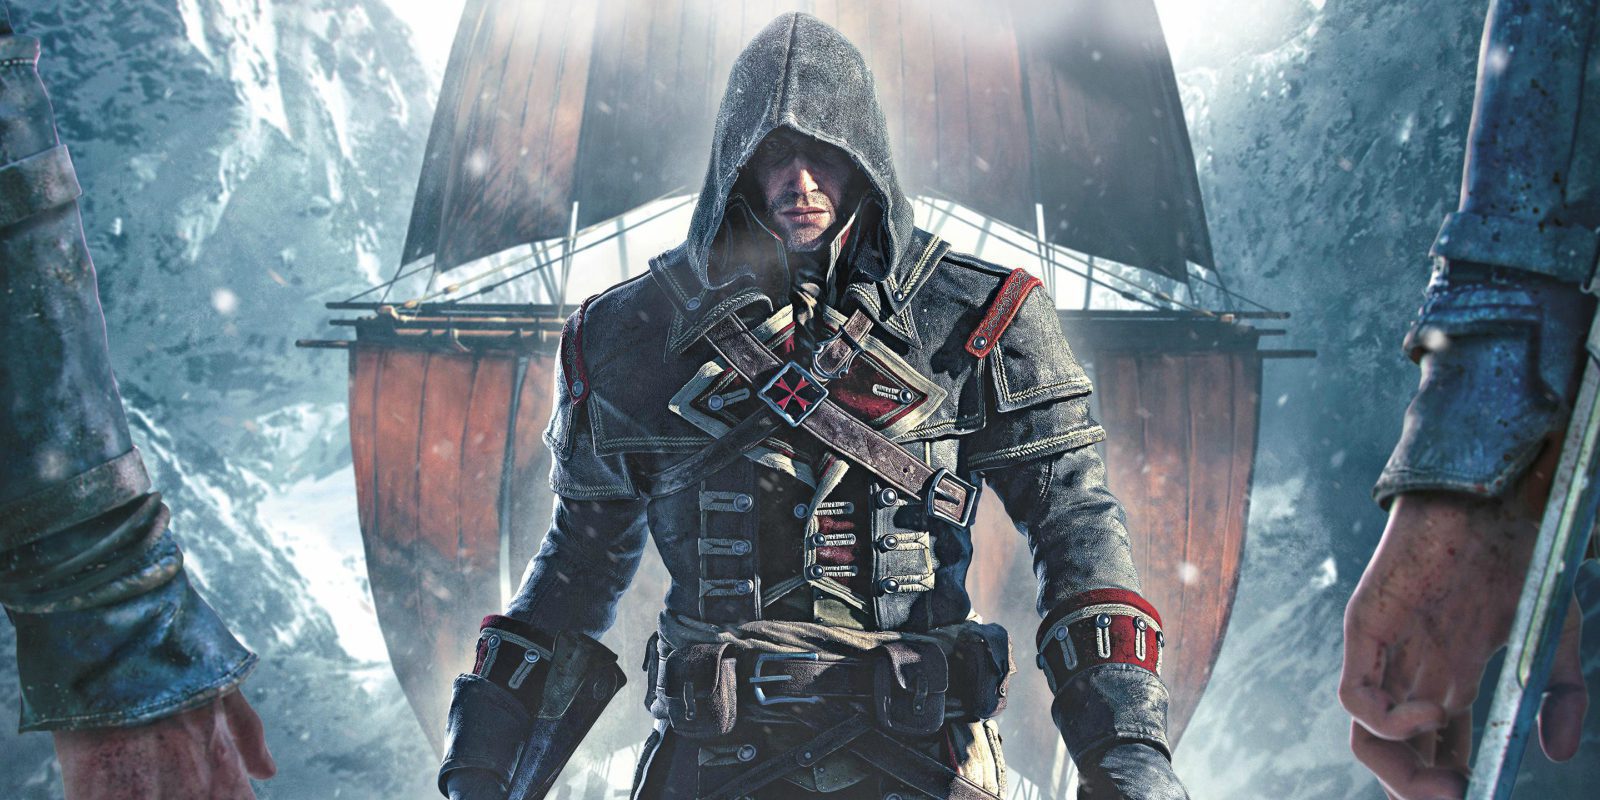 Ubisoft anuncia 'Assassin's Creed Rogue Remastered' para PS4 y Xbox One